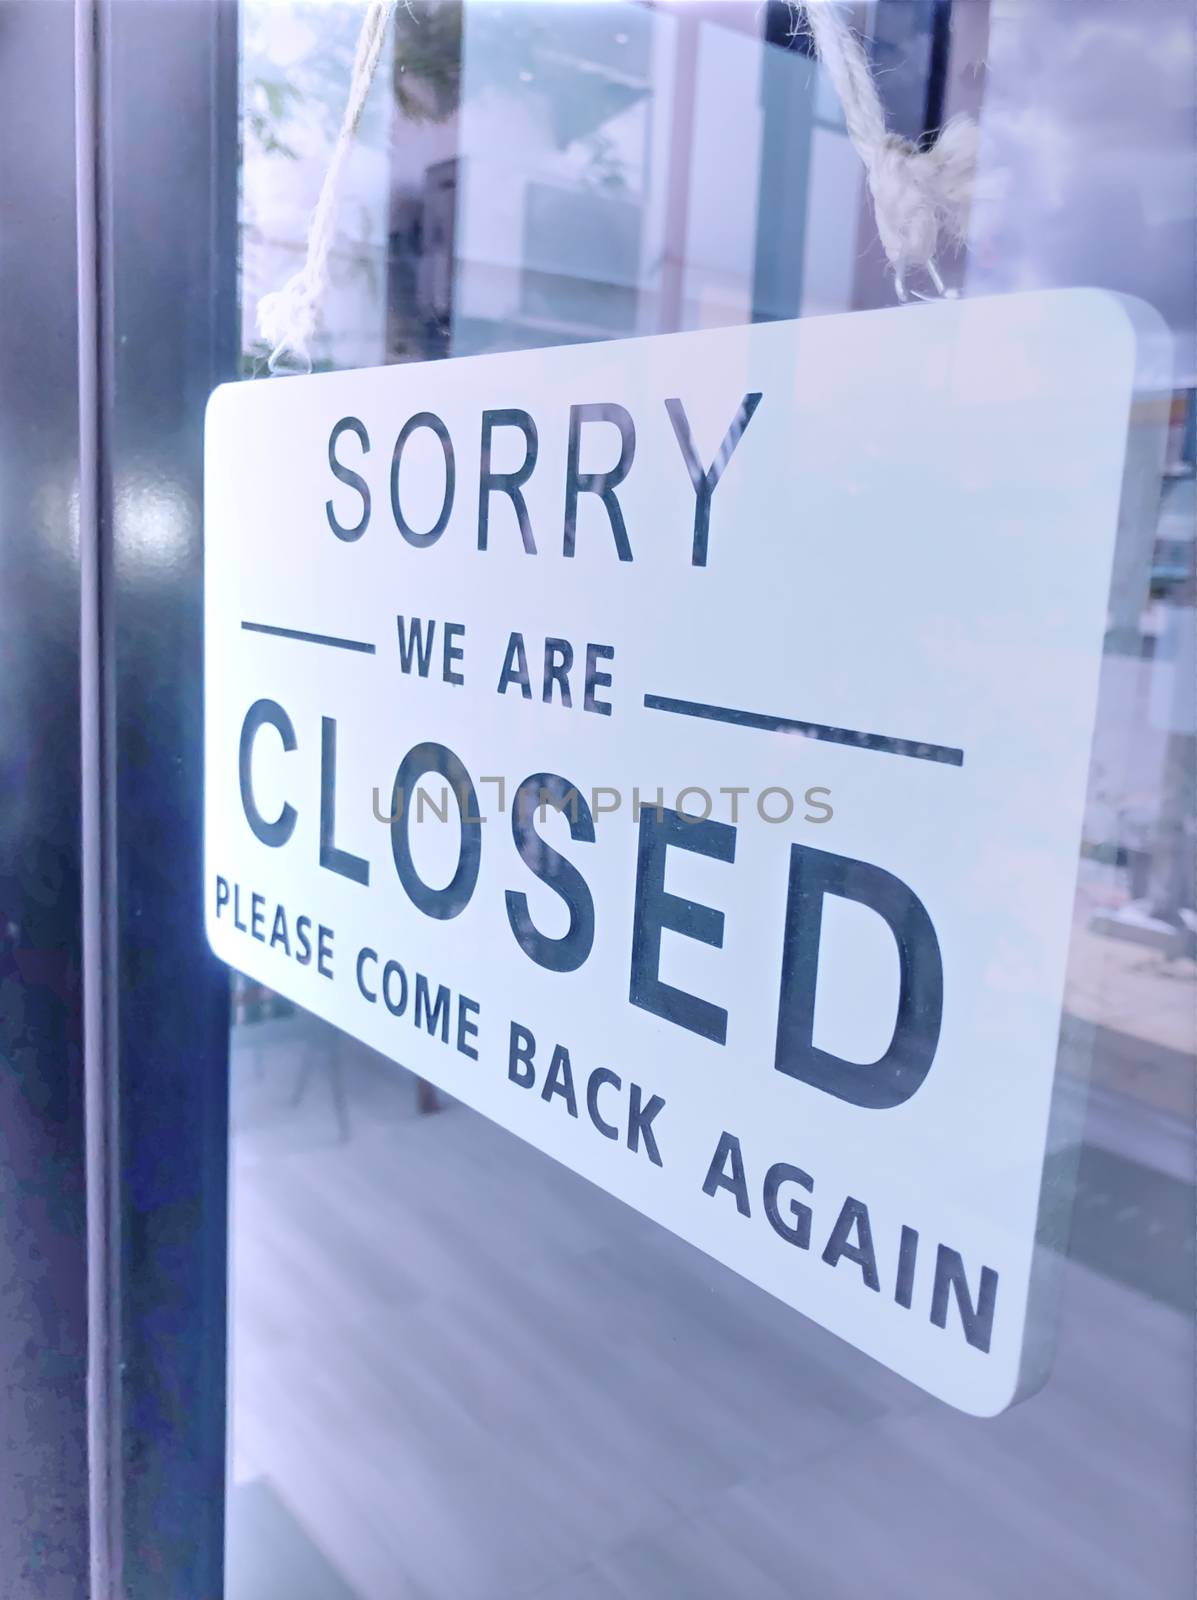 The sign of the coffee shop shows a temporary closure due to the coronavirus outbreak.